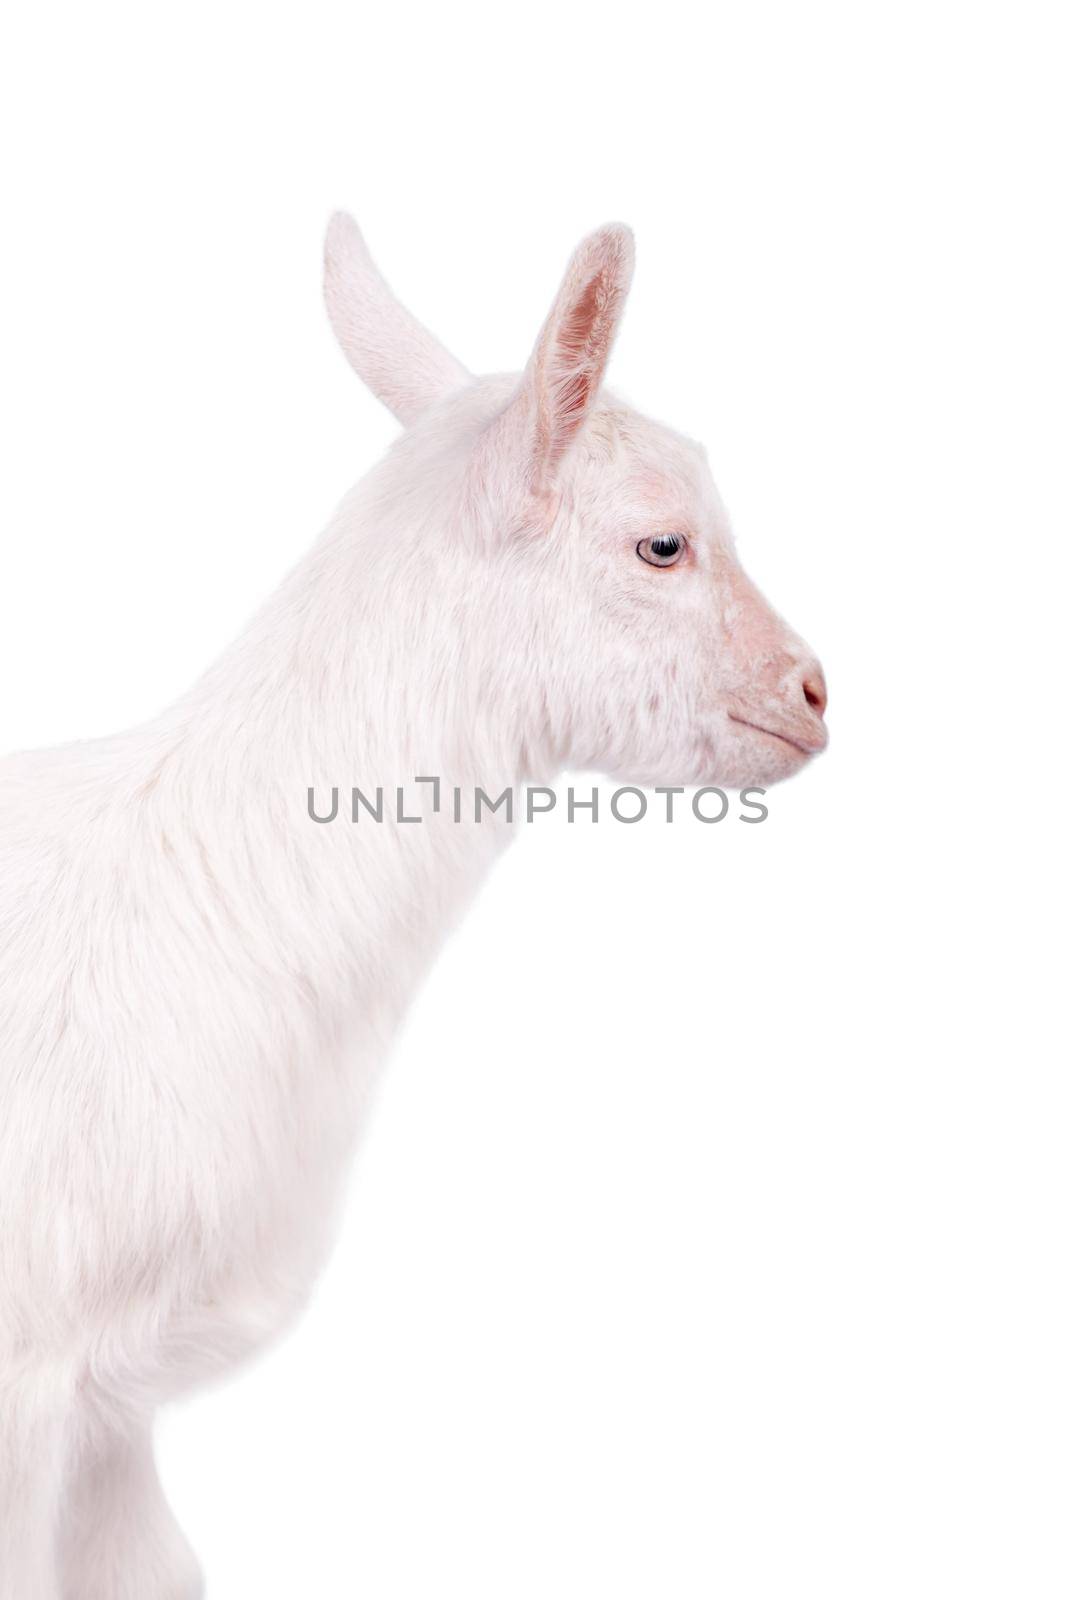 The goatling isolated on white by RosaJay